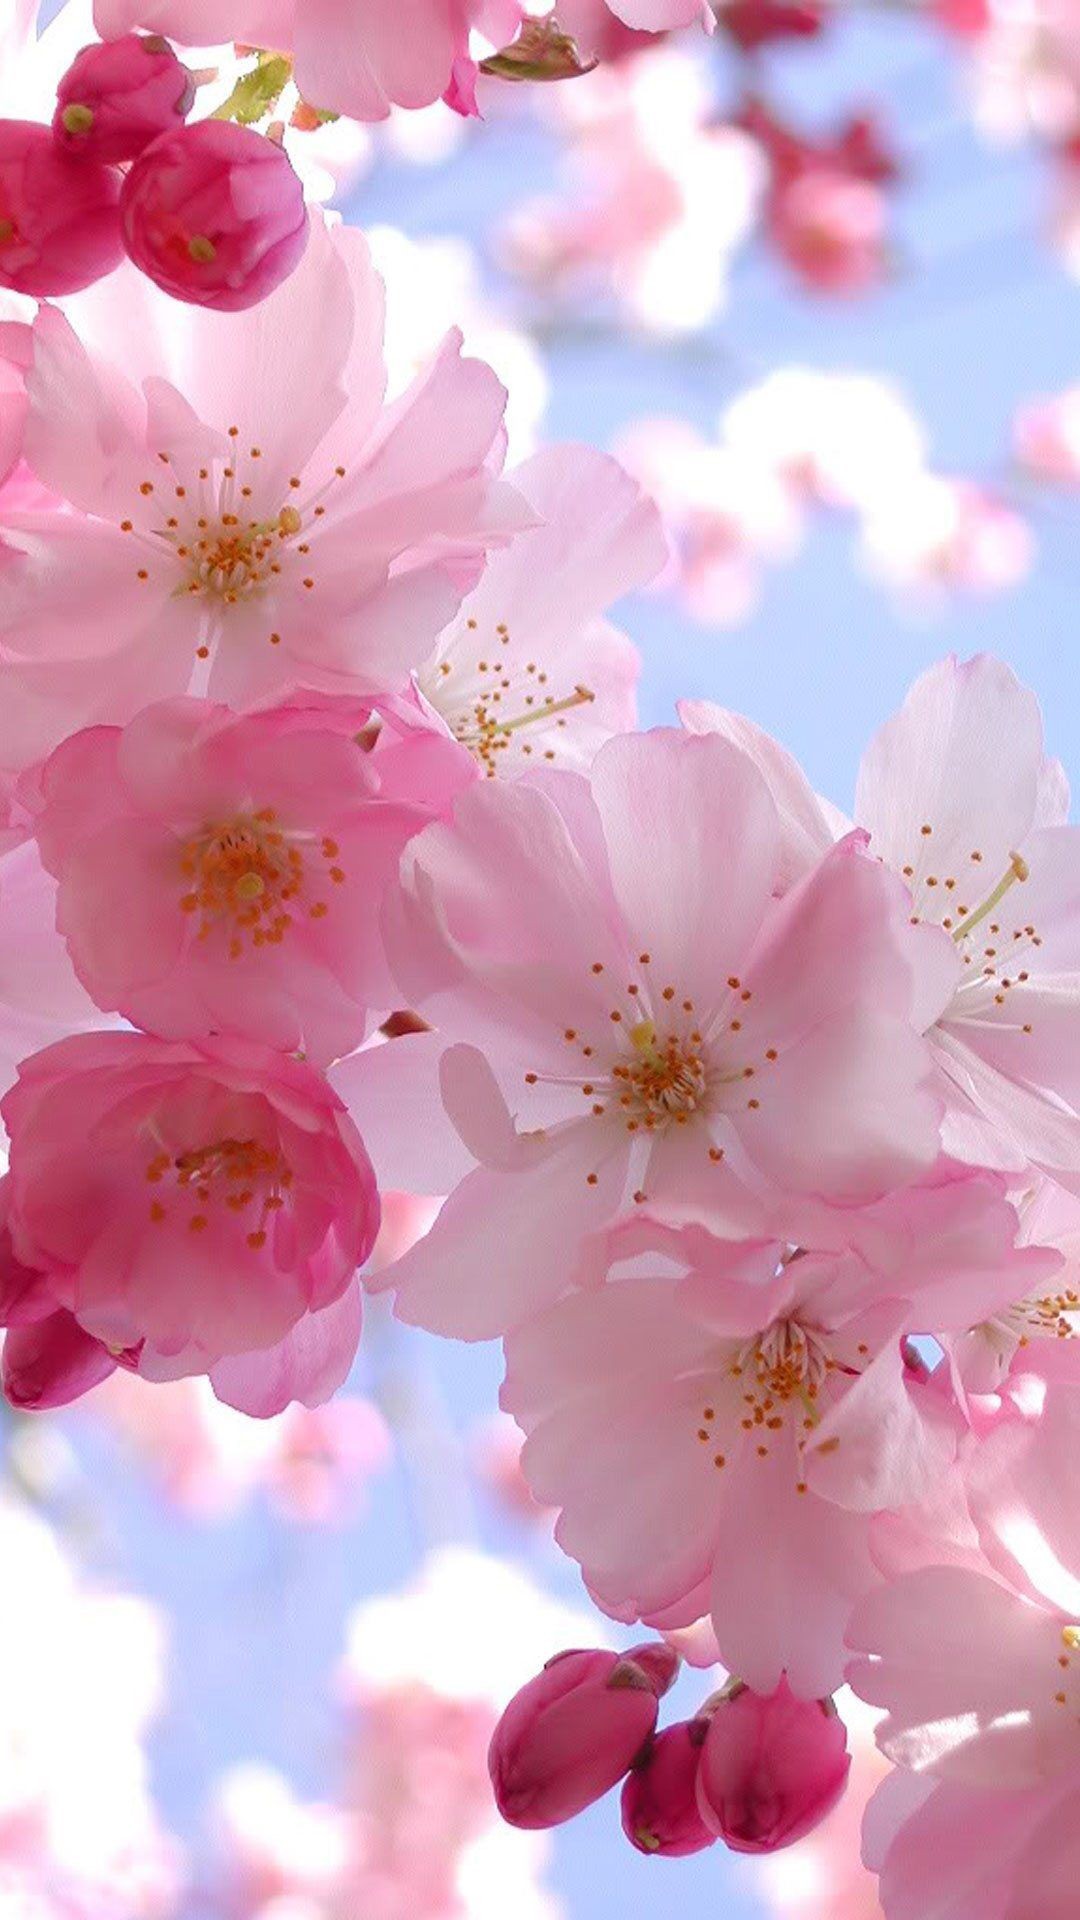 1080x1920 Pretty Pink White Sky Petals Tree Bud Blossom Desktop Background Images  Inspirational Reminds Me Of Seattle